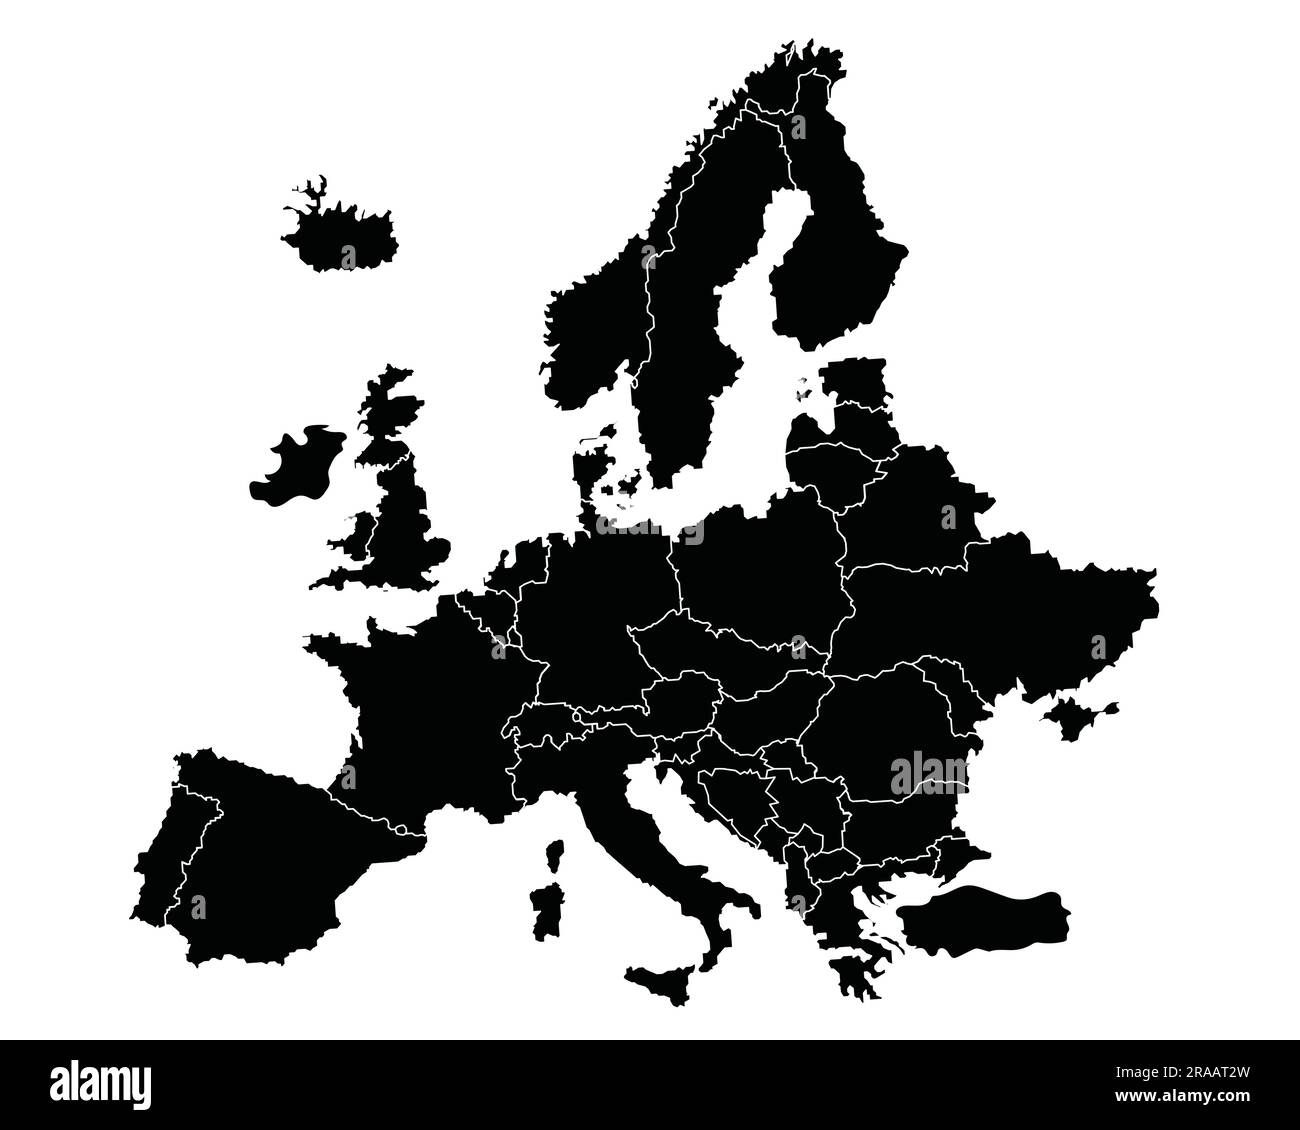 Layered Europe Map Silhouette Stock Vector